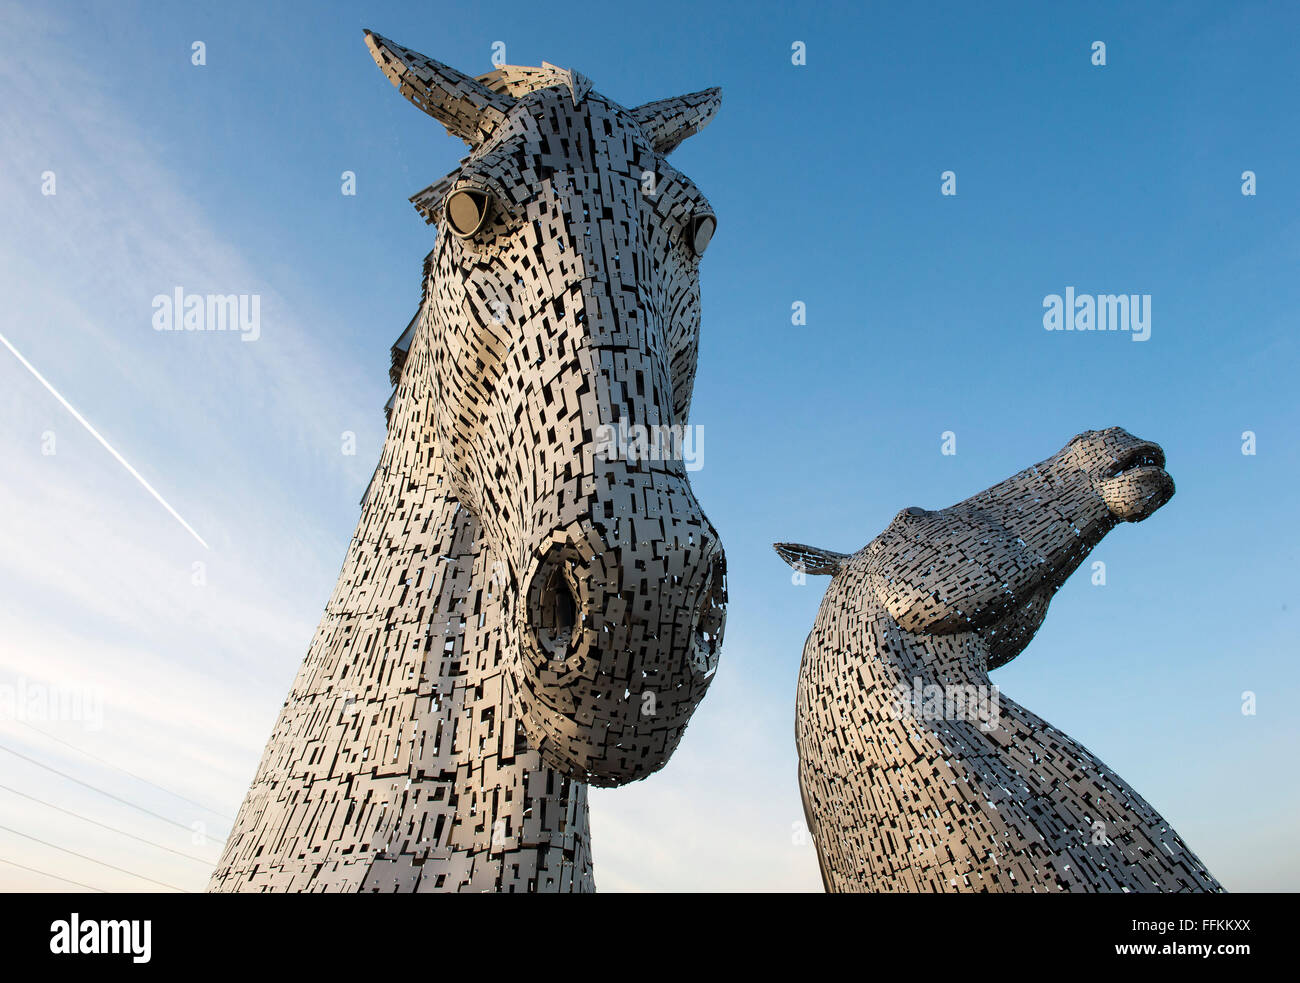 2nd February 2016, The Kelpies sculpture by Andy Scott, two giant horses heads in stainless steel, The Helix, Falkirk Scotland. Stock Photo